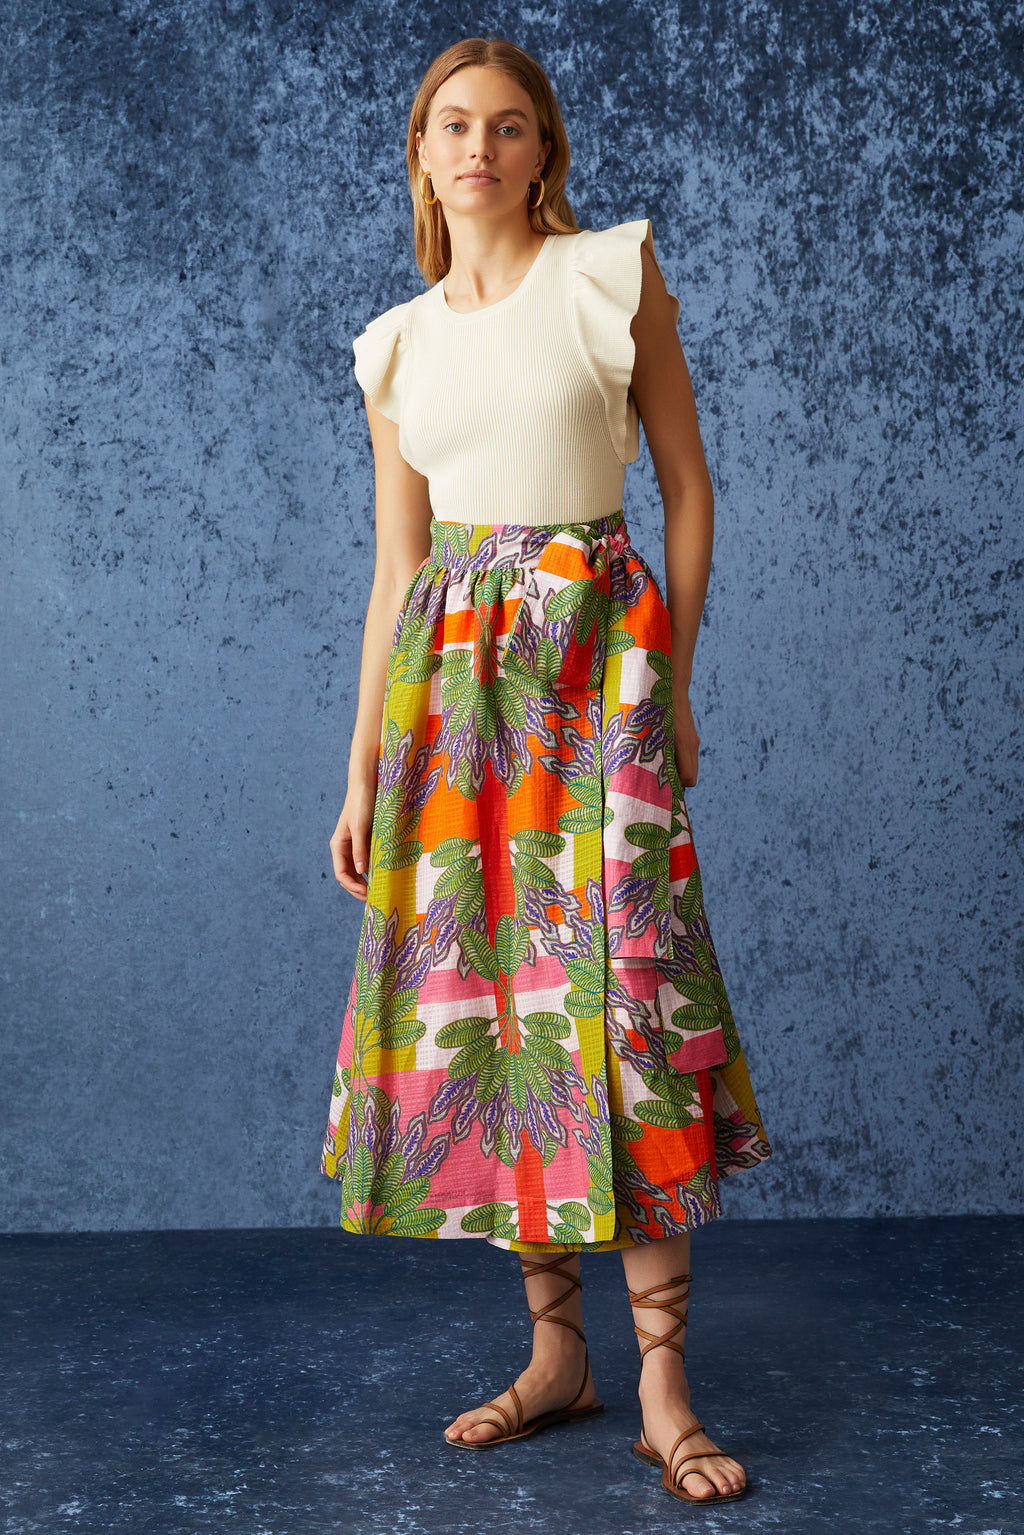 Wrap skirt with long ties that are fringed at the ends in a multicolor plaid with palm leaves